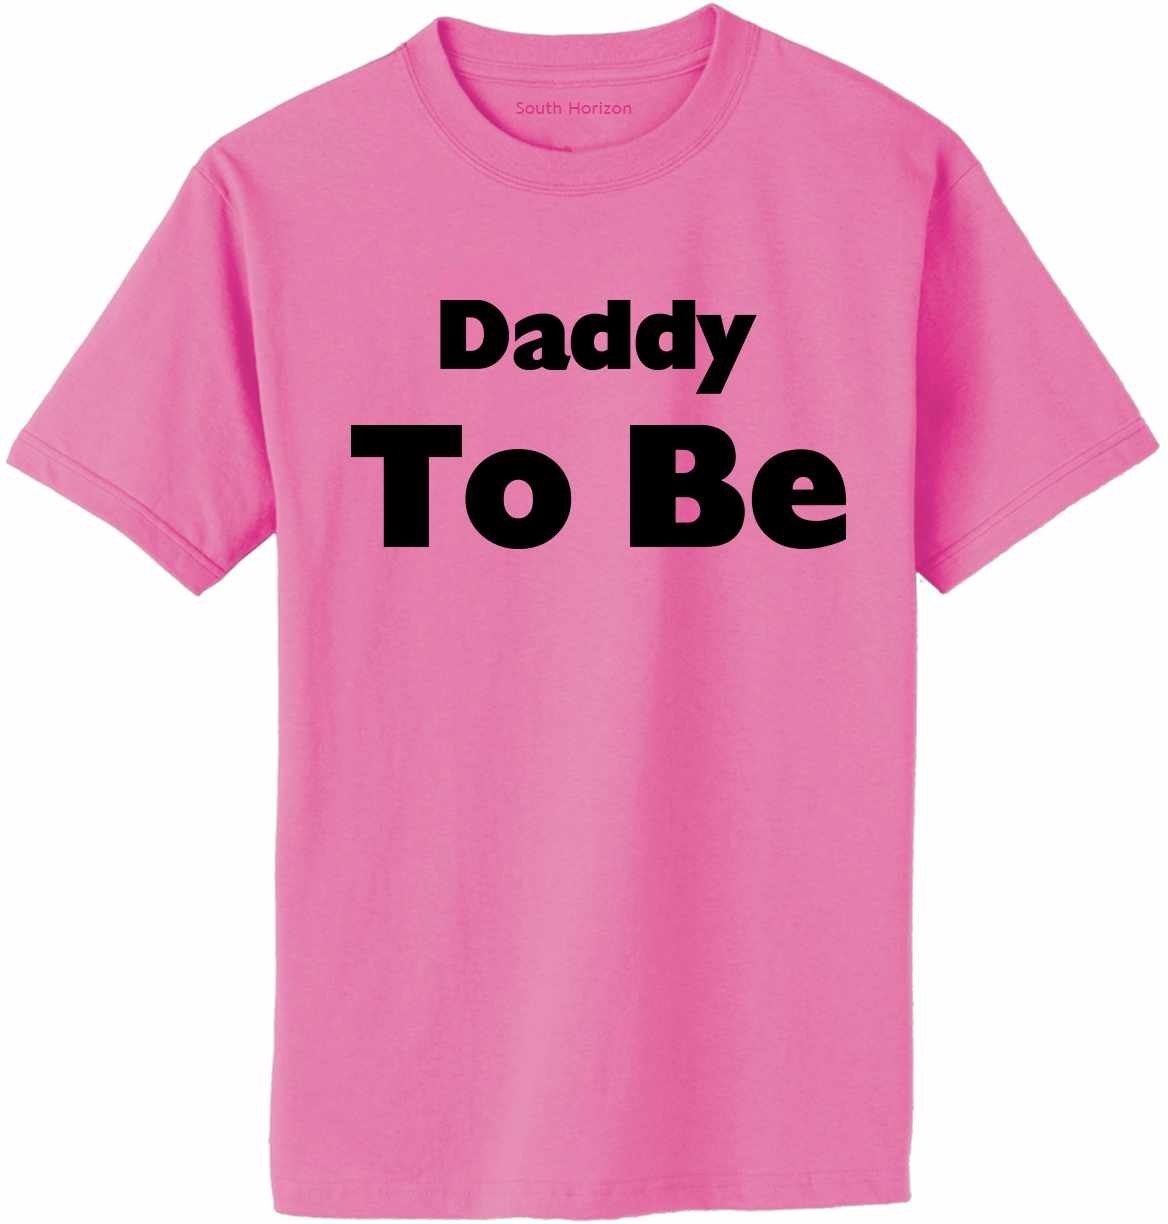 Daddy To Be Adult T-Shirt